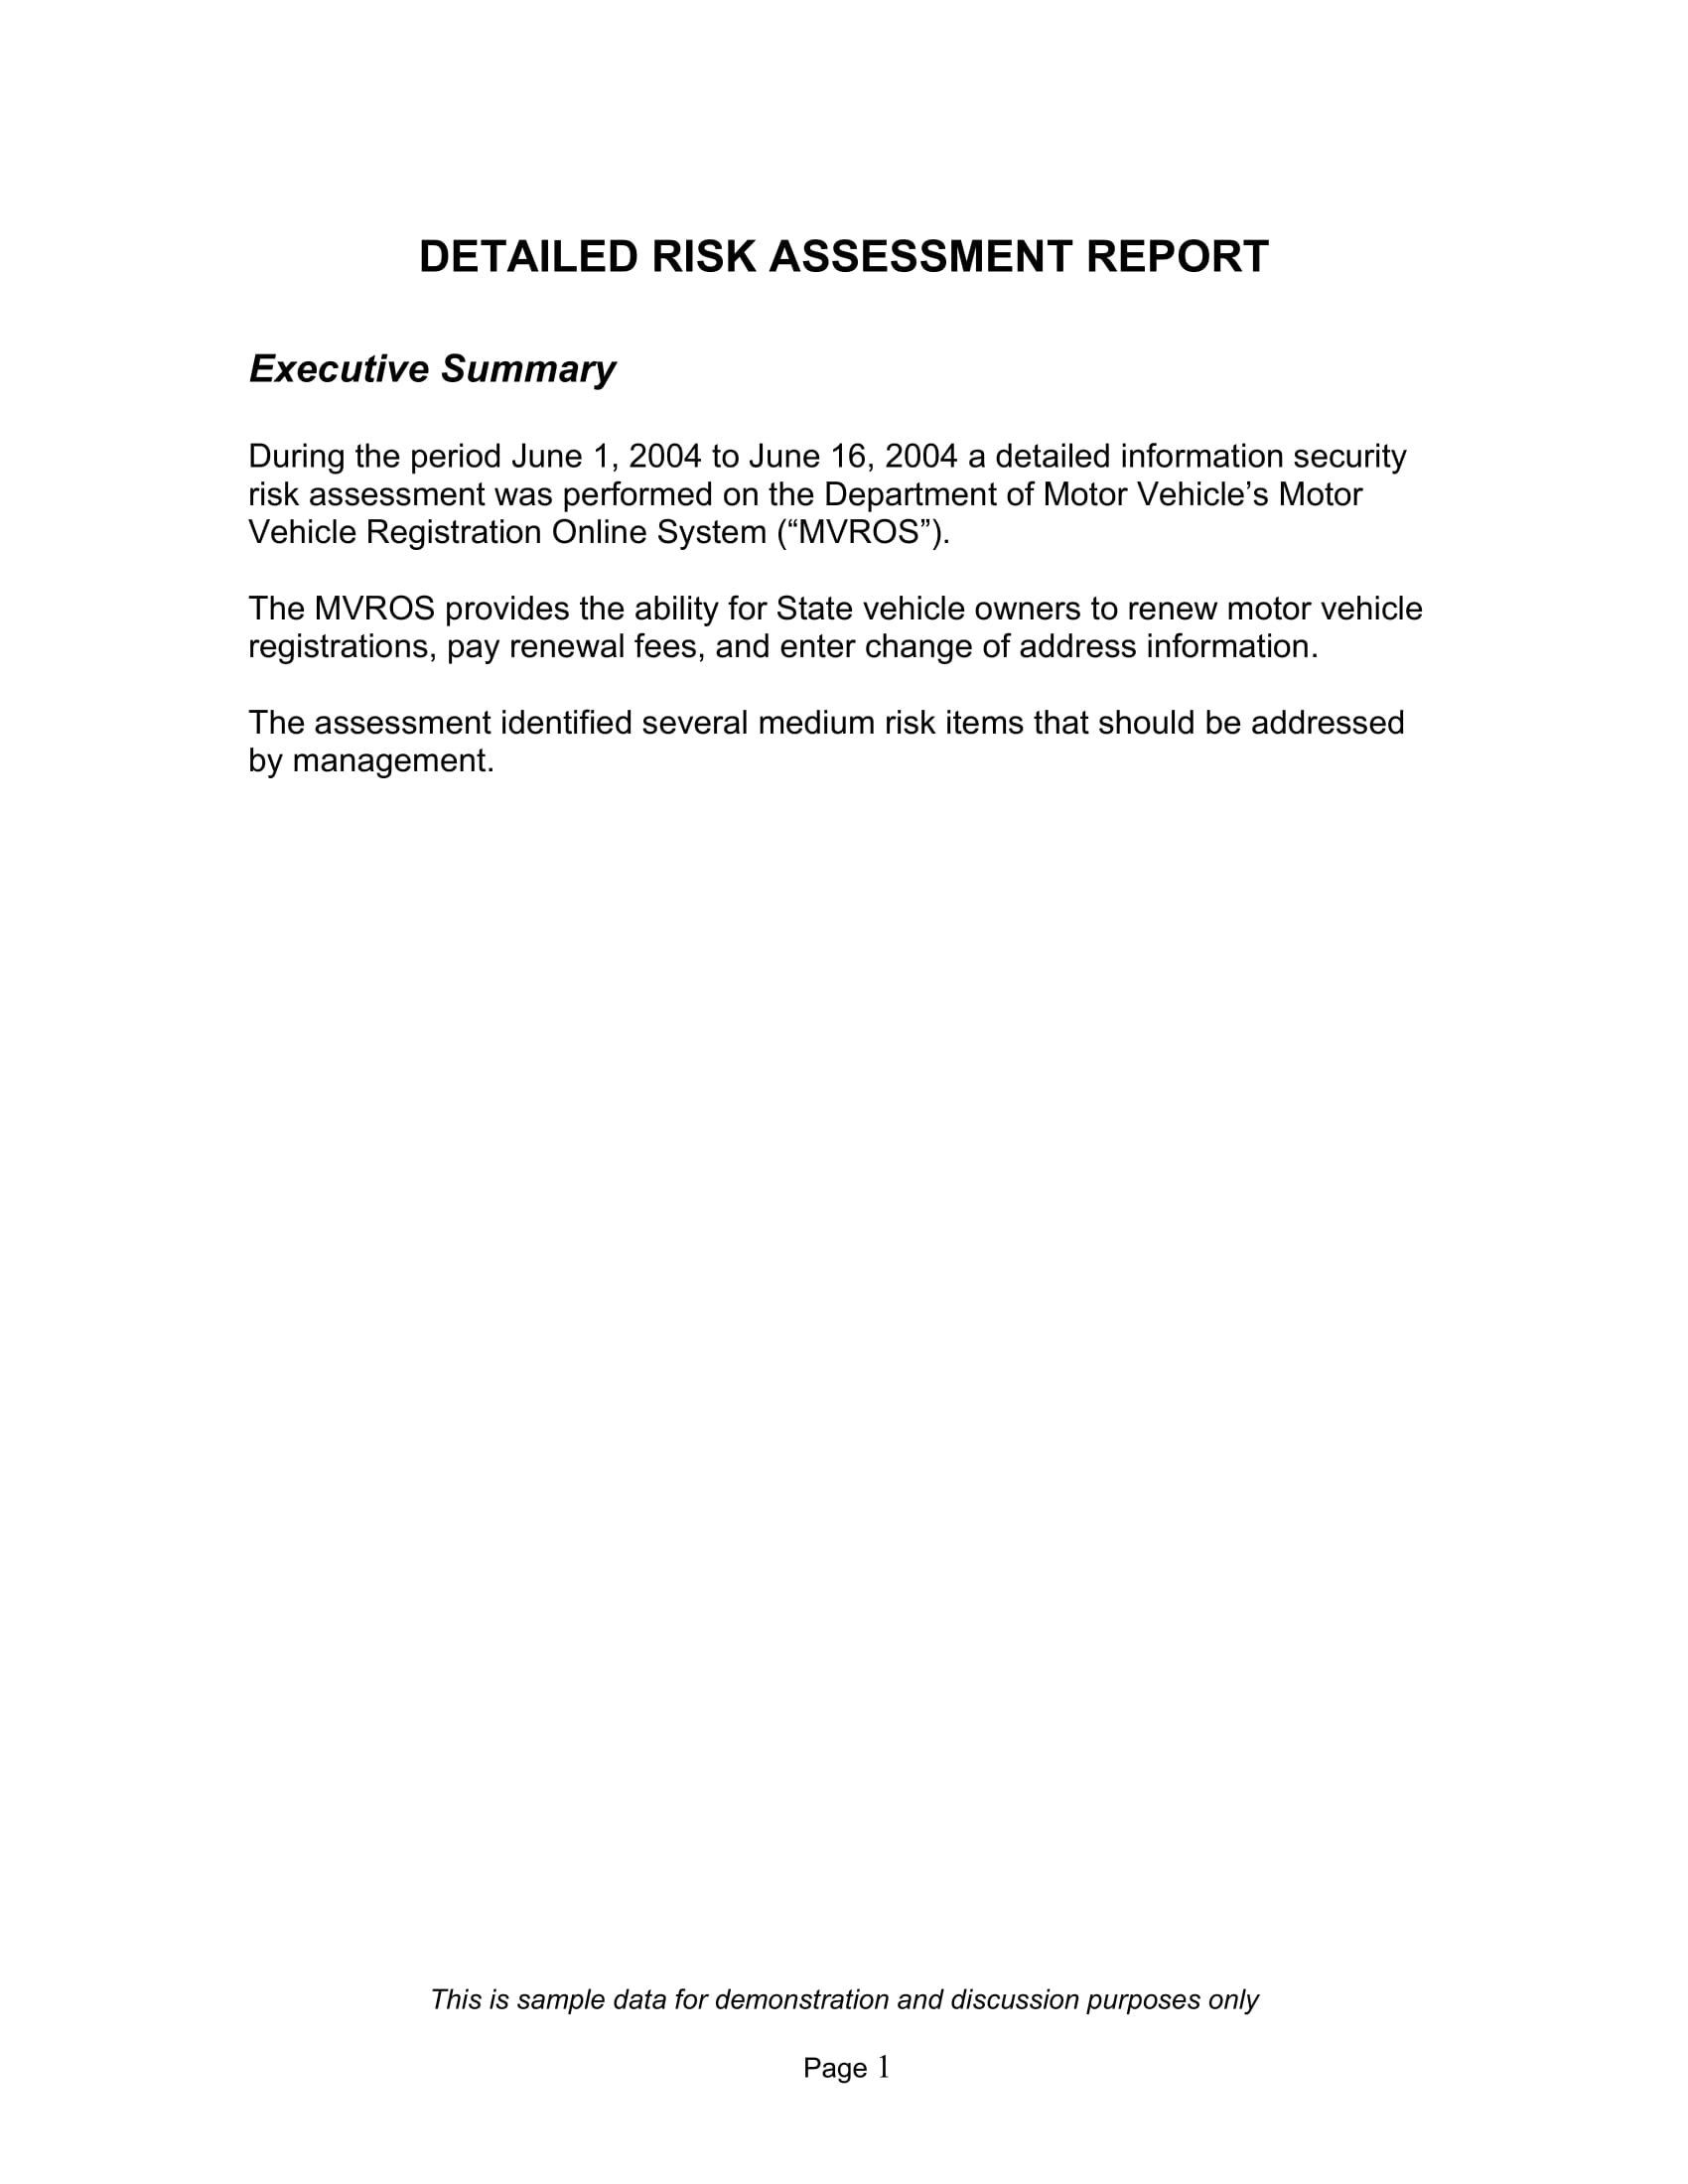 detailed risk assessment report on it management and online systems used example 01